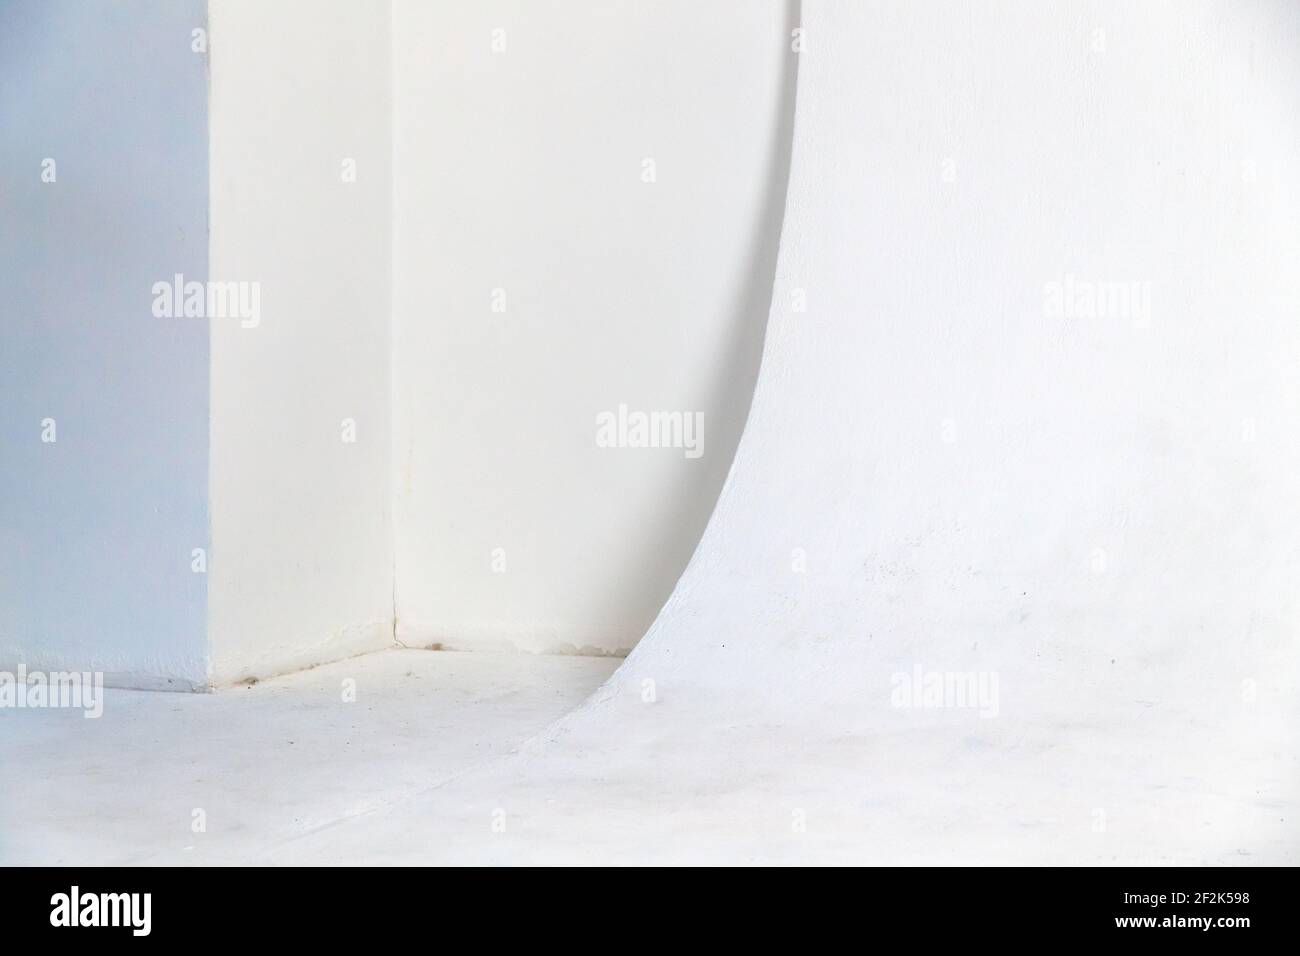 Abstract blank white photo studio interior, cyclorama structure with a smooth transition between horizontal and vertical planes. Background photo Stock Photo